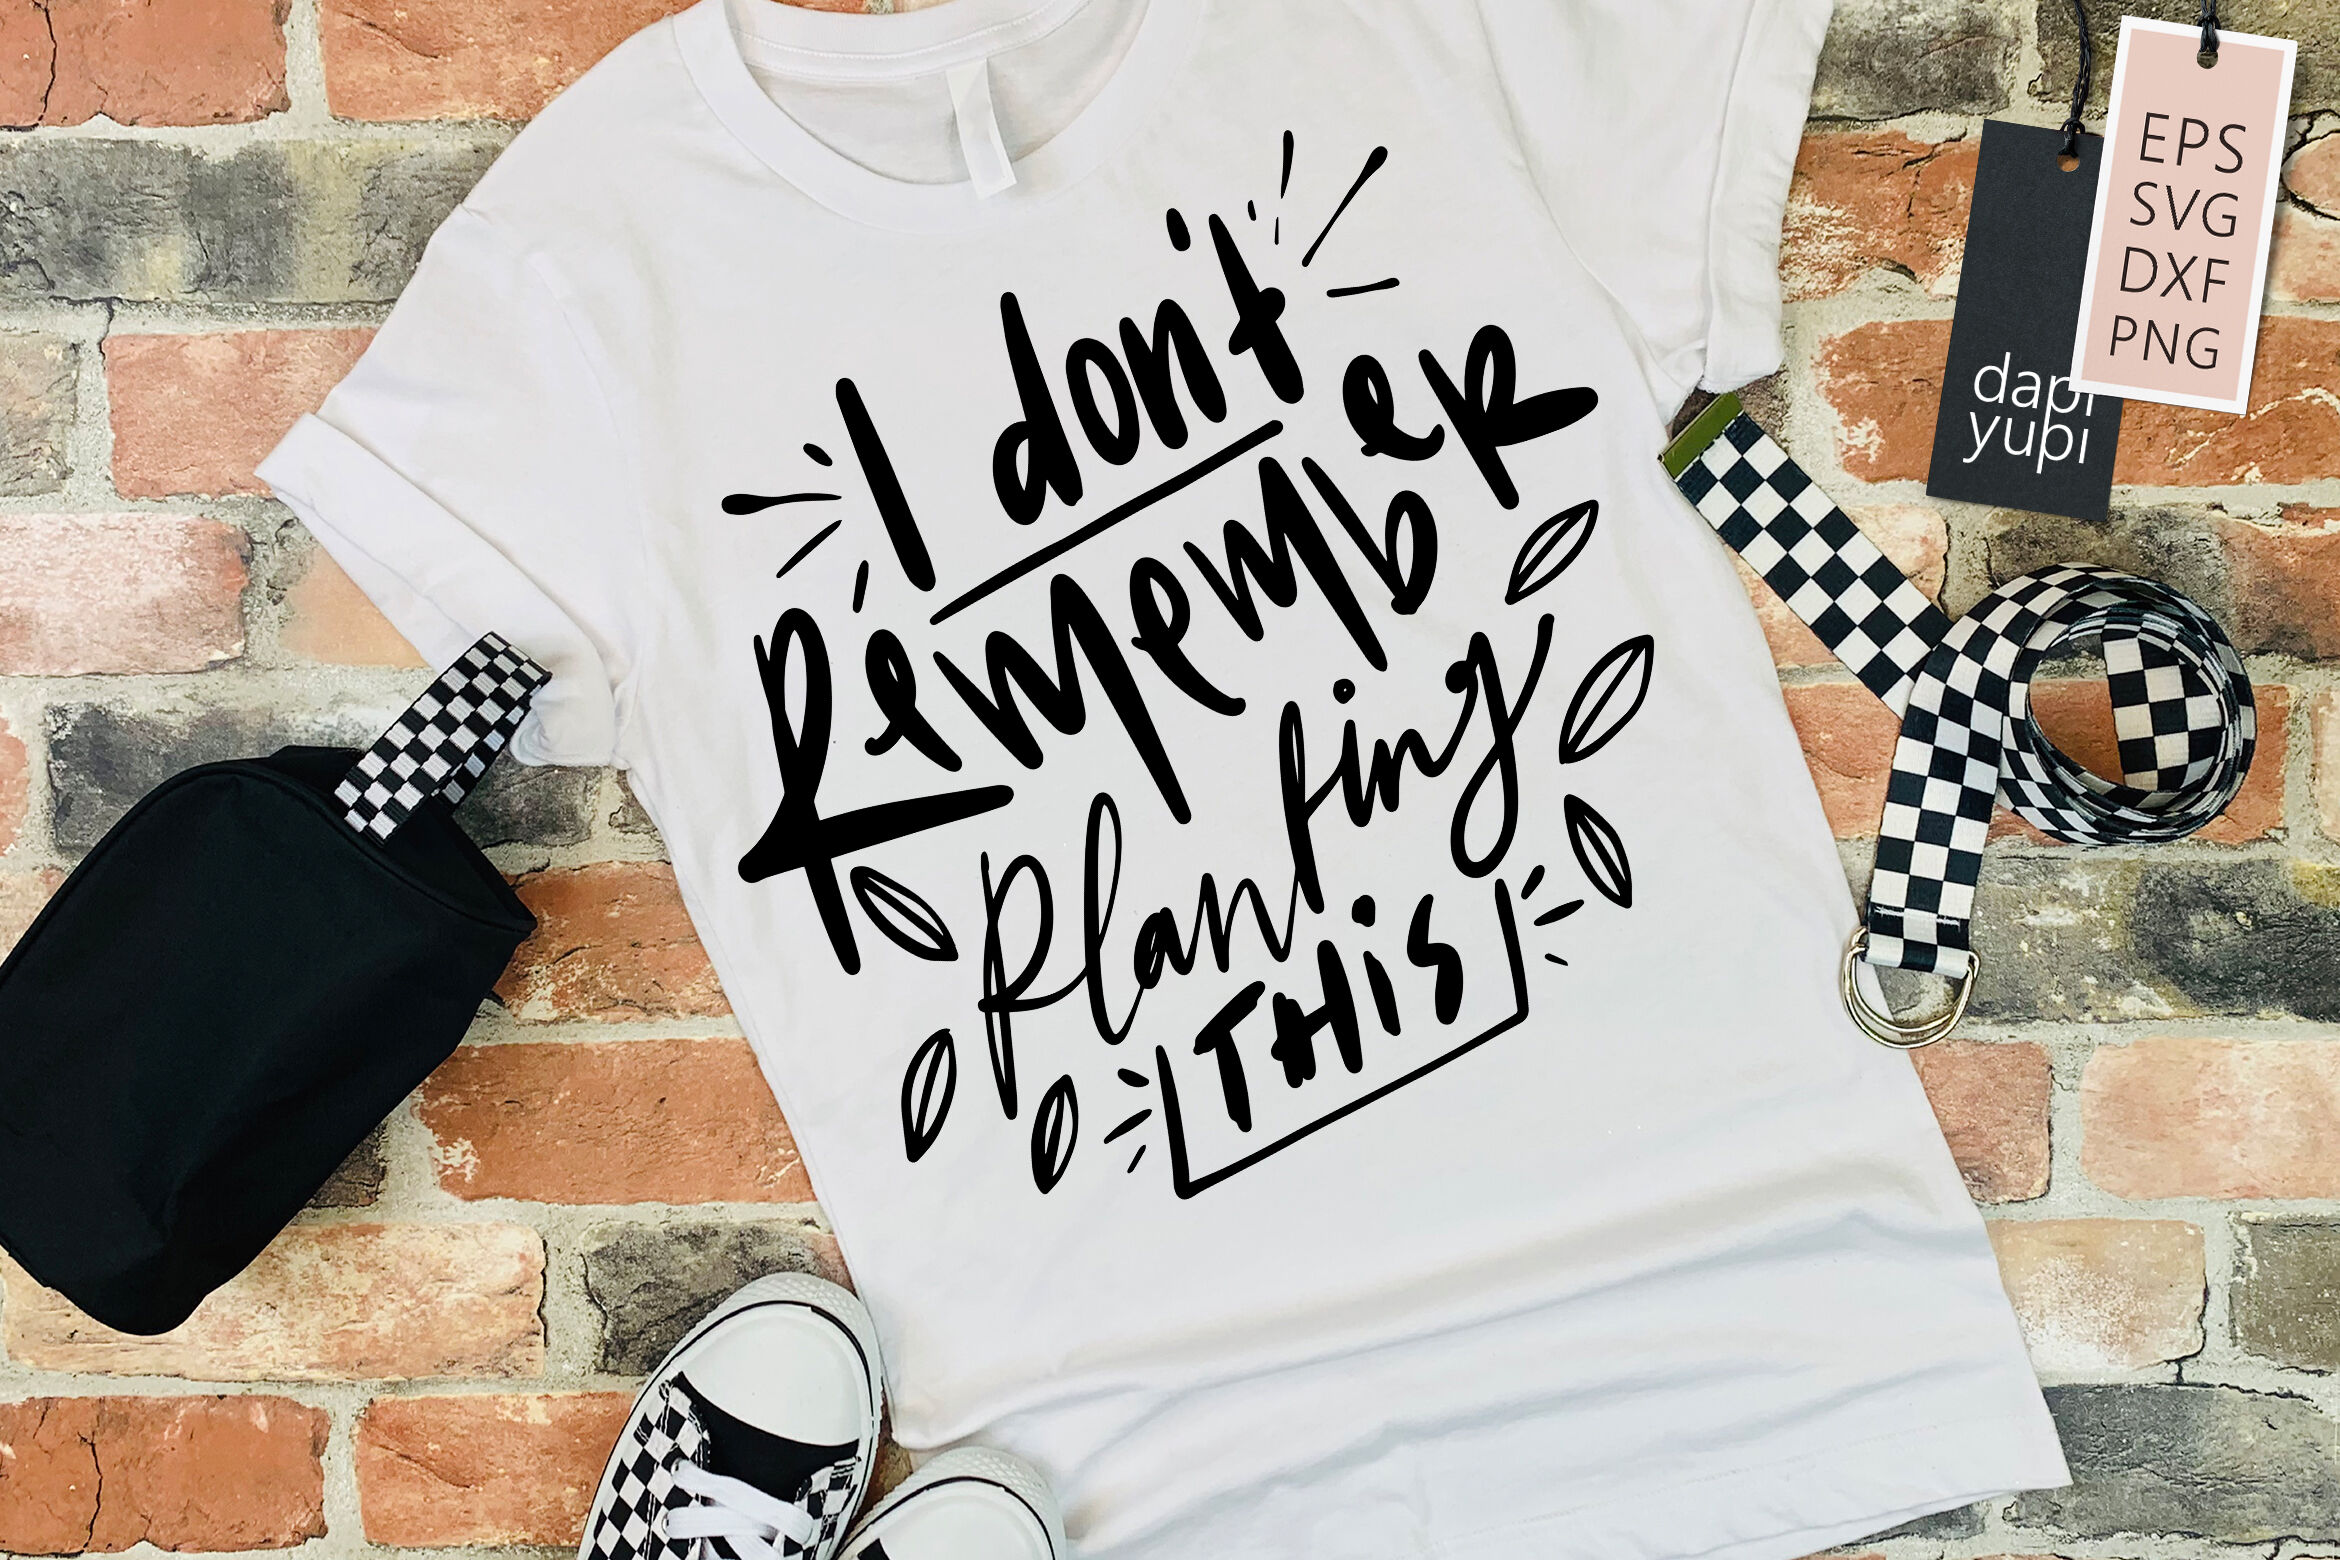 I Don't Remember Planting This Lettering Quotes By dapiyupi | TheHungryJPEG